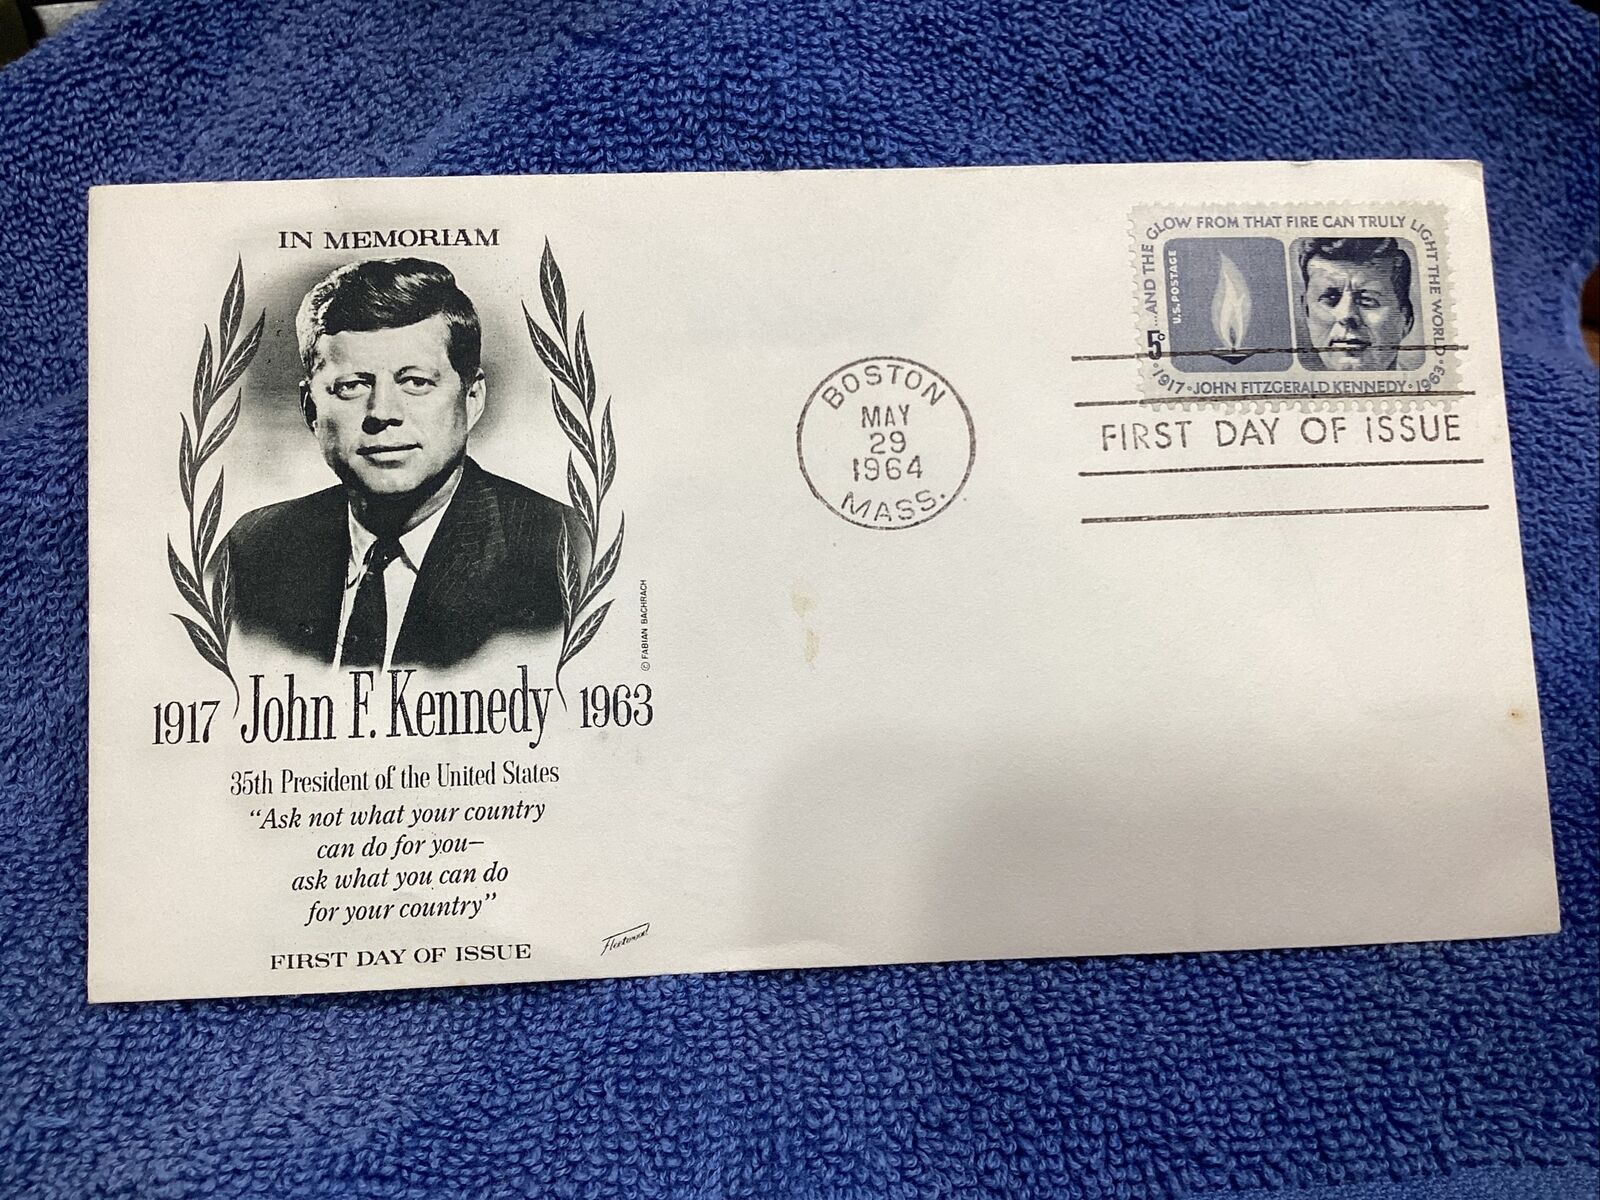 First Day of issue JFK 5 cent 64 round 29 stamp envelope Outlet ☆ Free Shipping date P.O. Max 89% OFF